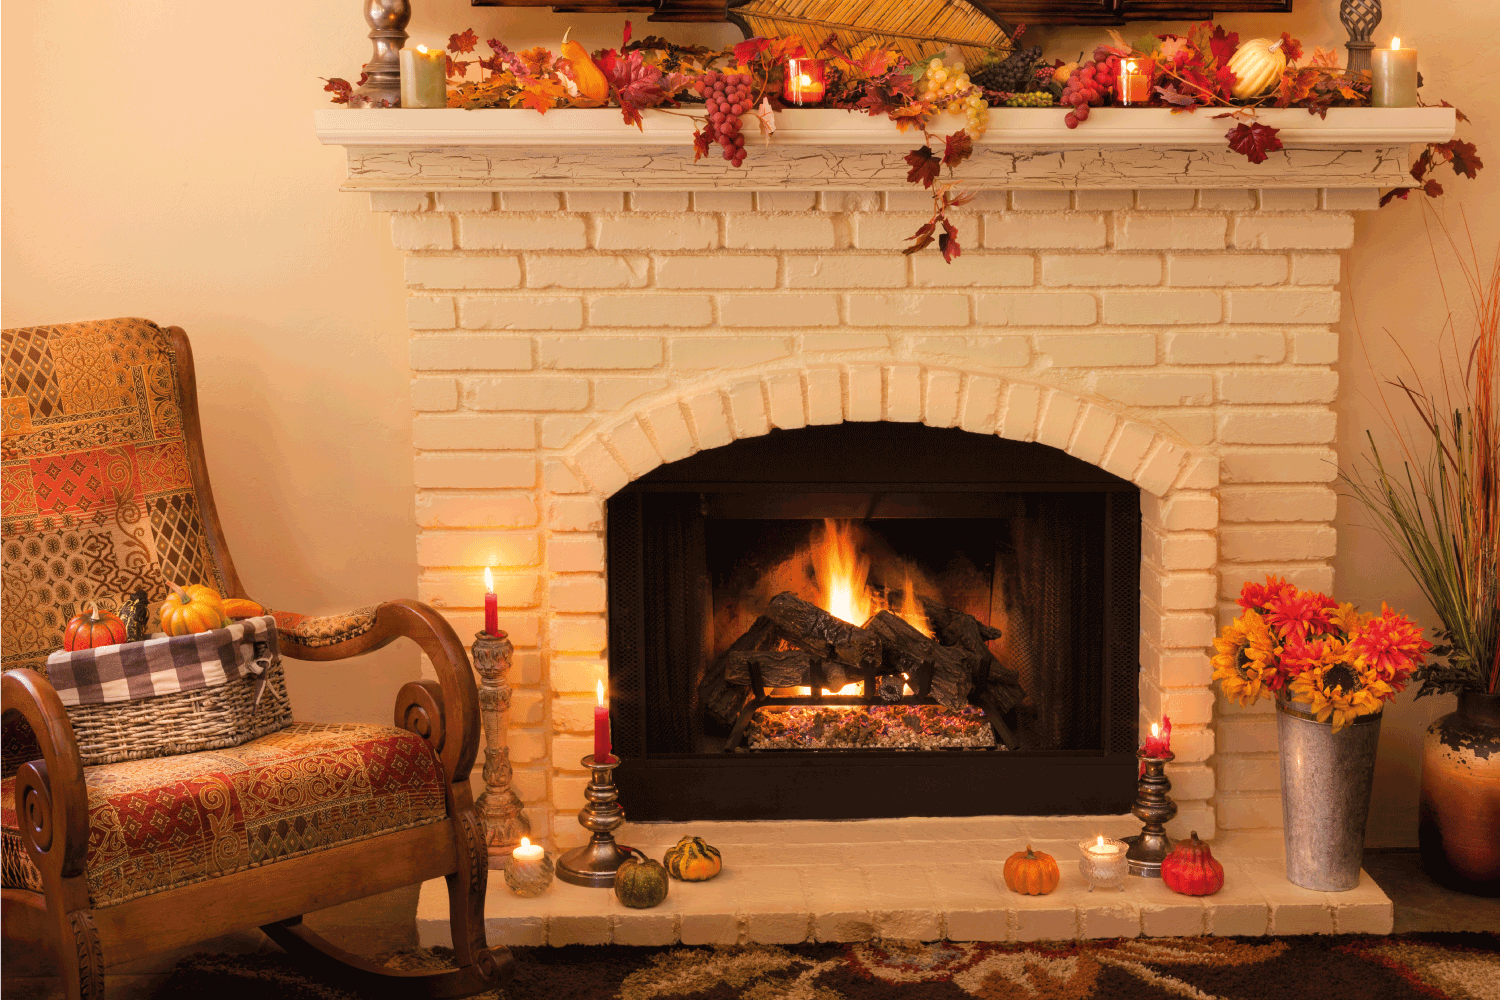 A light yellow brick old fashioned fireplace with arched opening has a roaring fire with logs and is decorated on the mantel and hearth